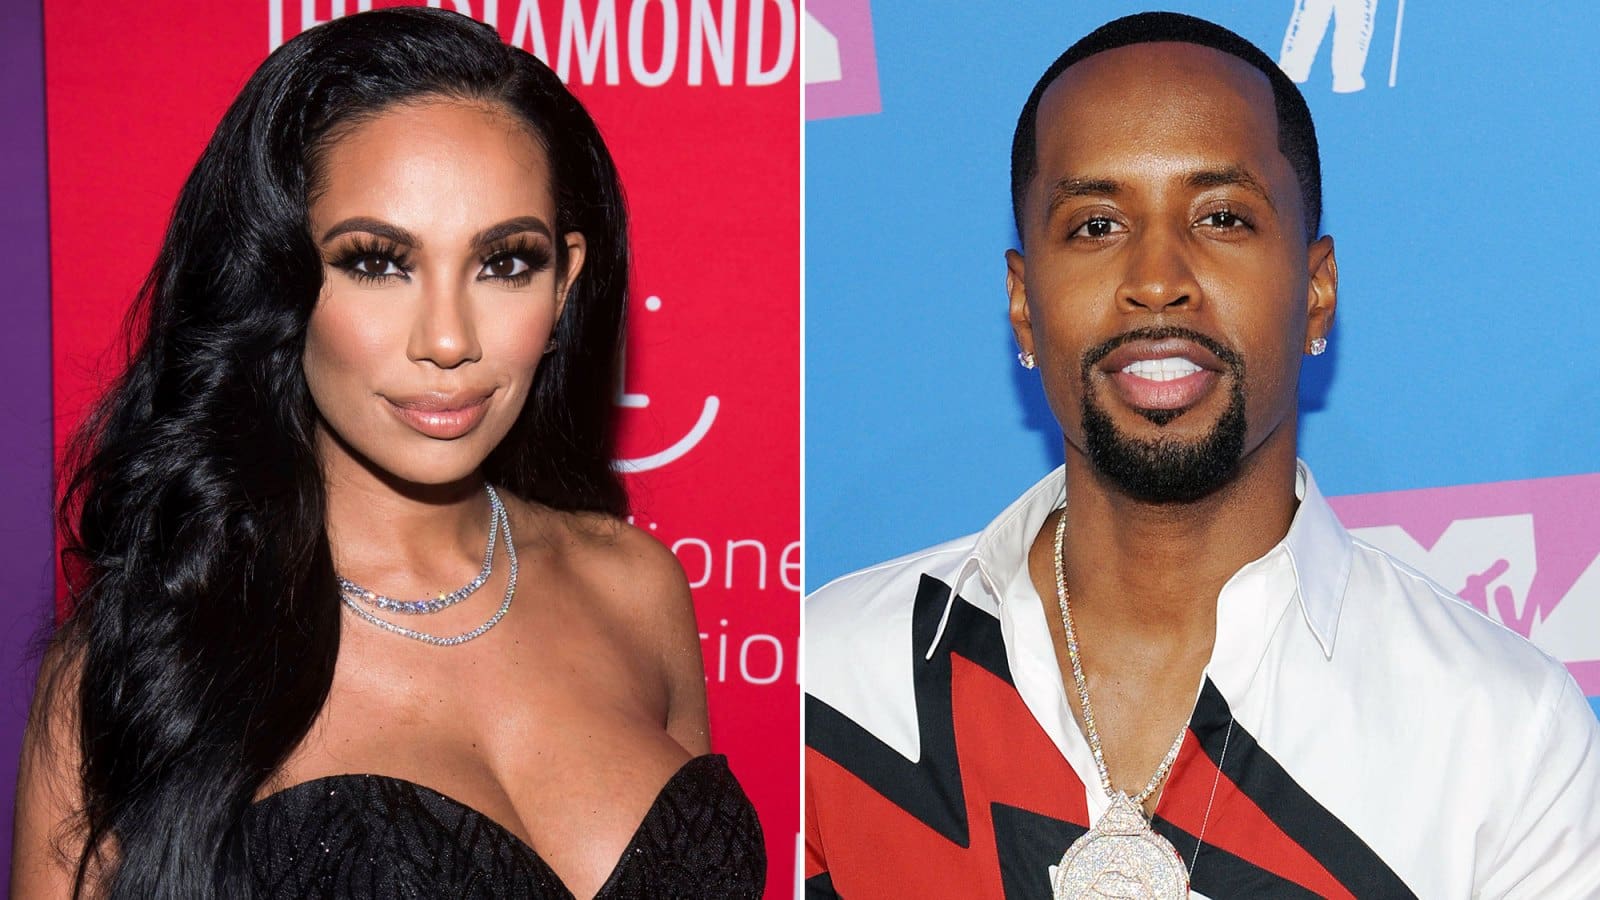 Safaree And Erica Mena Found Their Dream Home And Closed The Deal - See The Photos Here - It's Dream-Like!